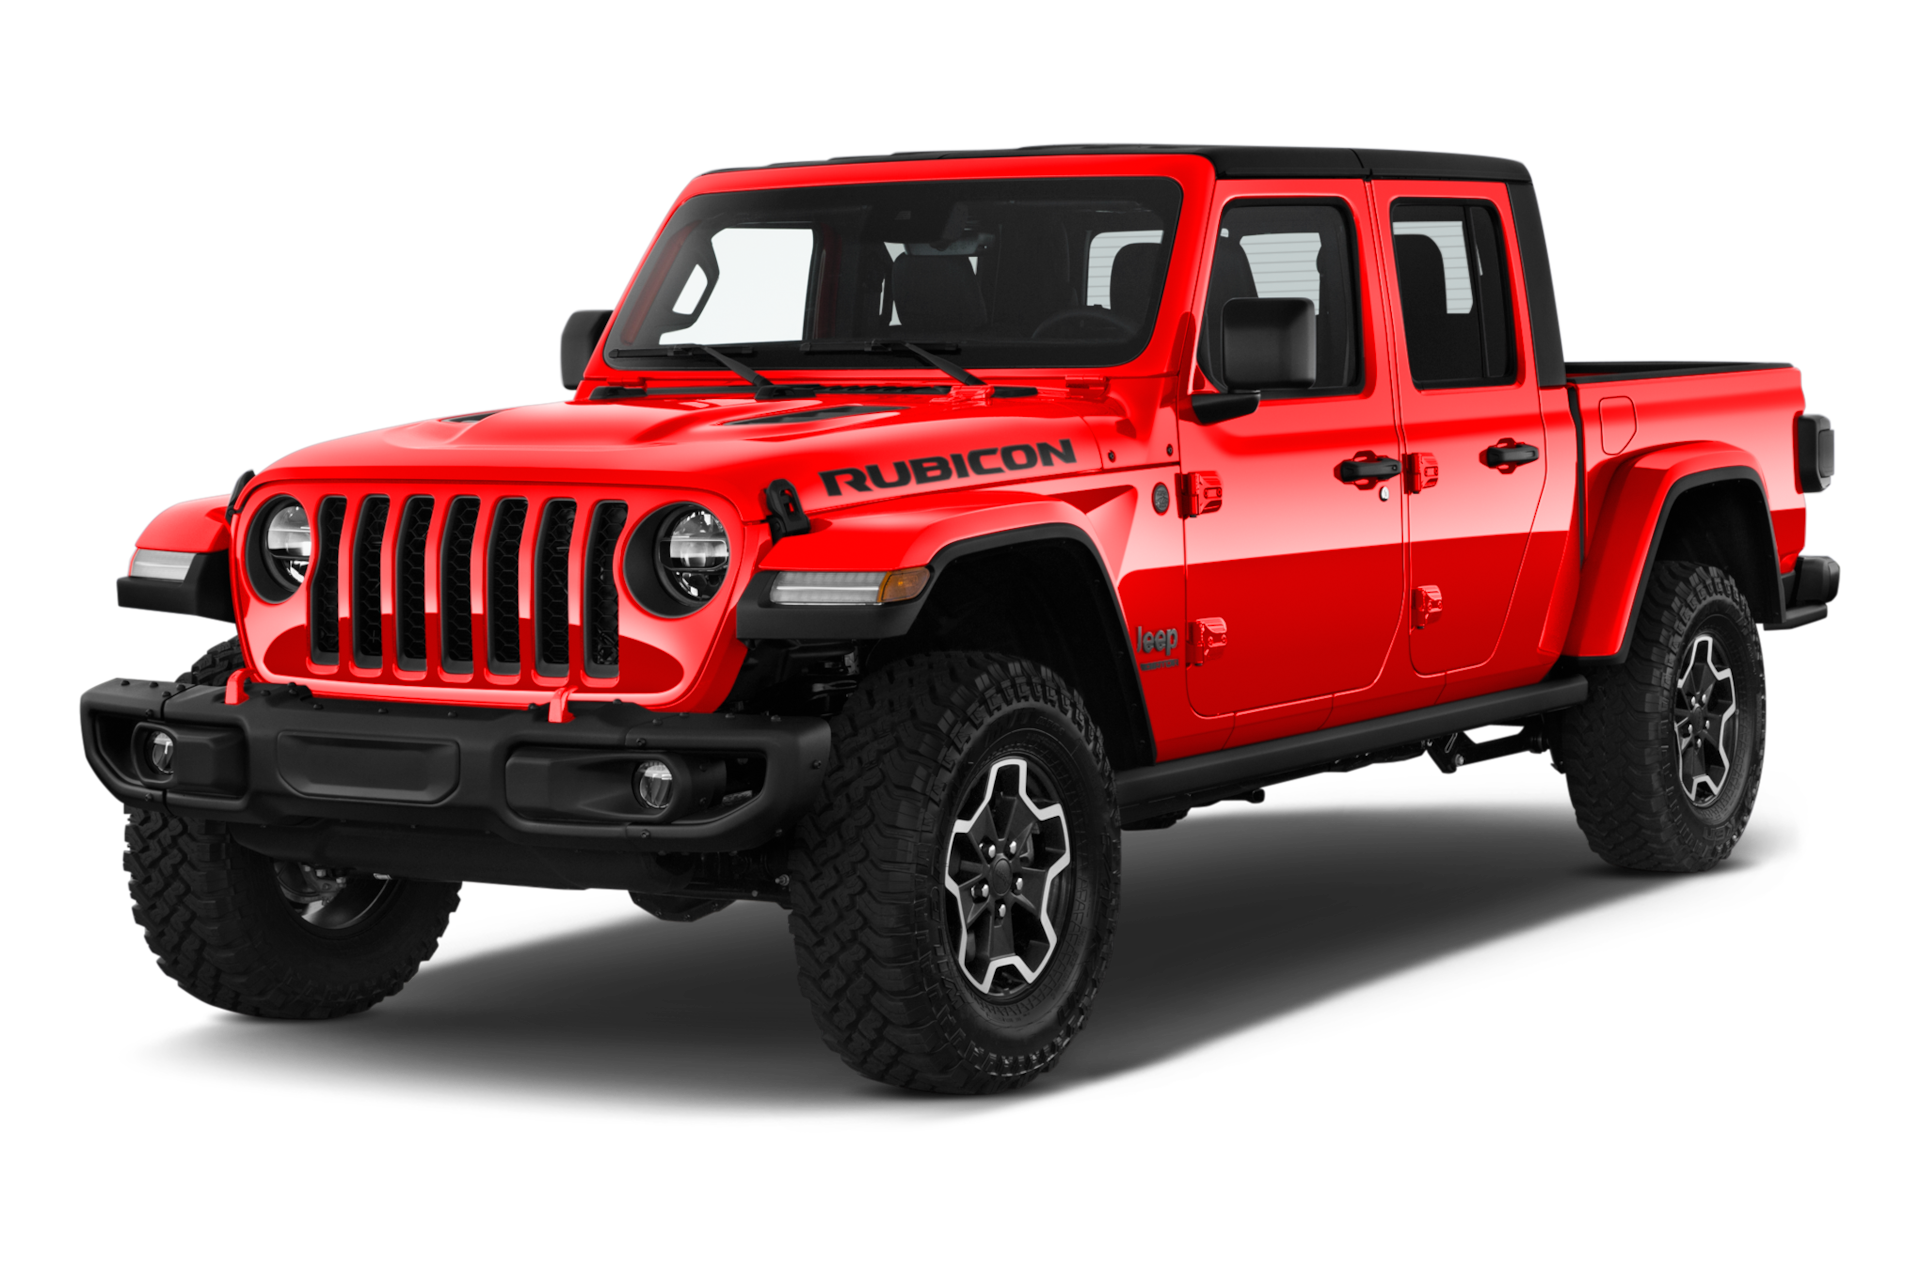 2020 Jeep Gladiator Prices, Reviews, and Photos - MotorTrend